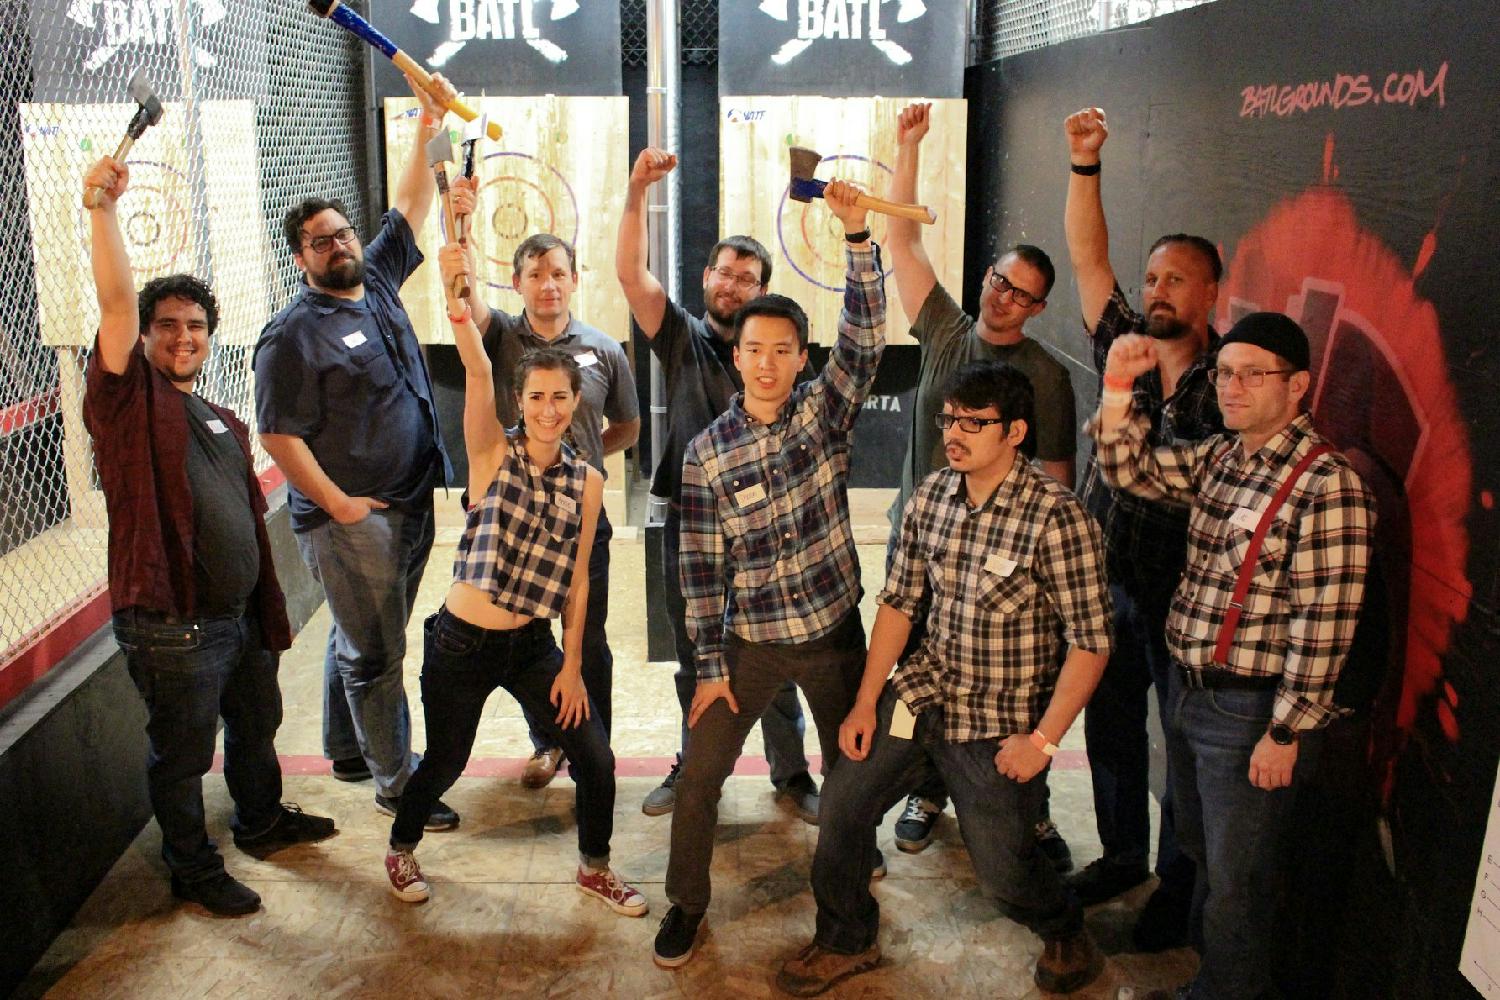 Our employees moonlight as lumberjacks! Fun happy hour event throwing axes.